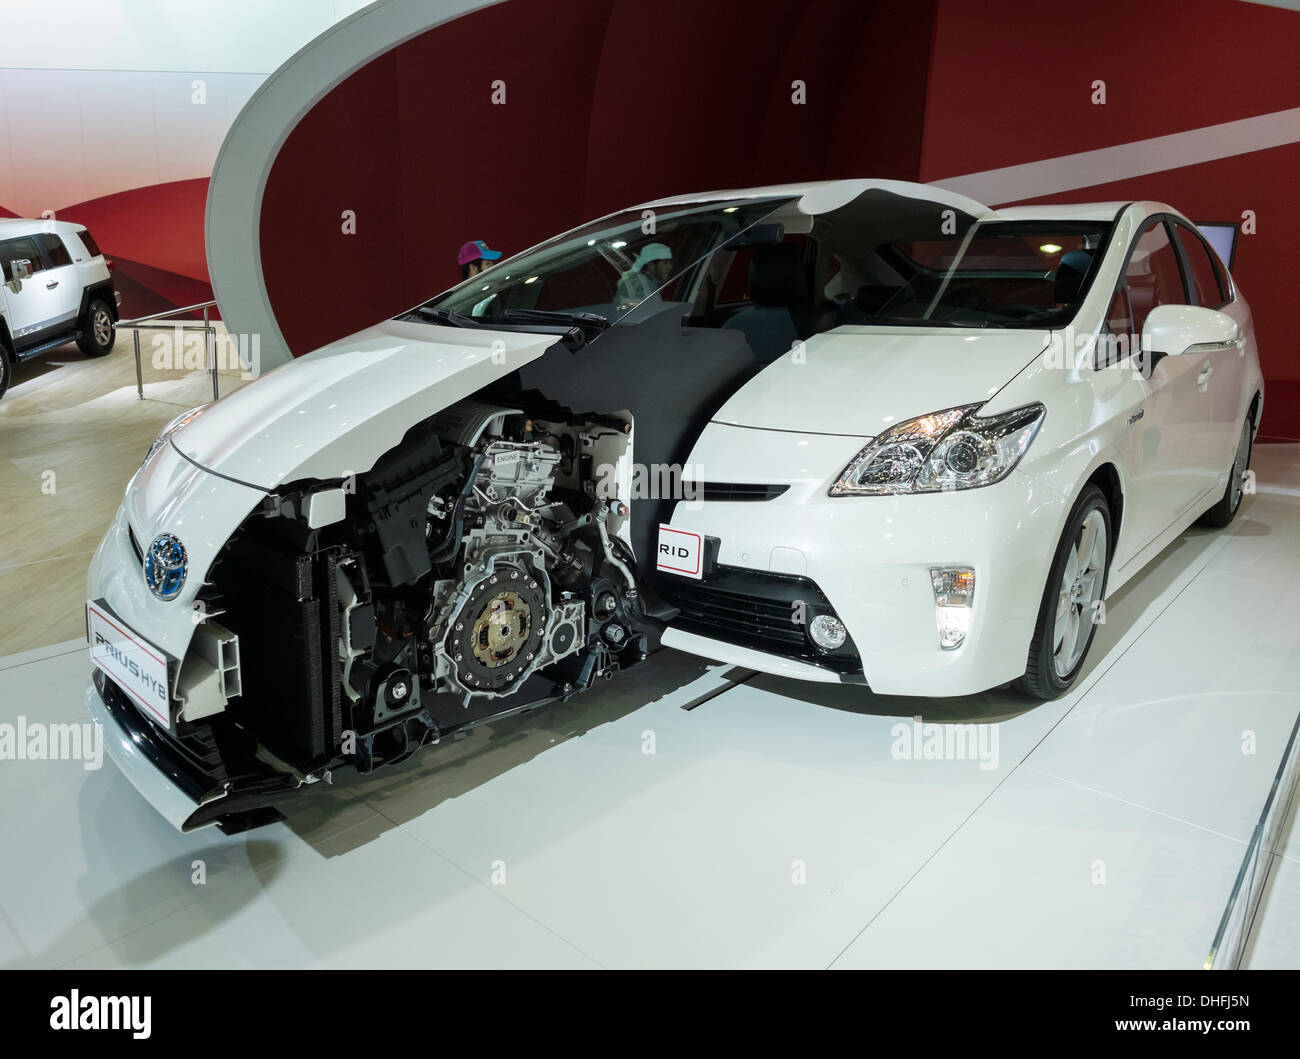 Related Keywords  U0026 Suggestions For 2013 Prius Engine